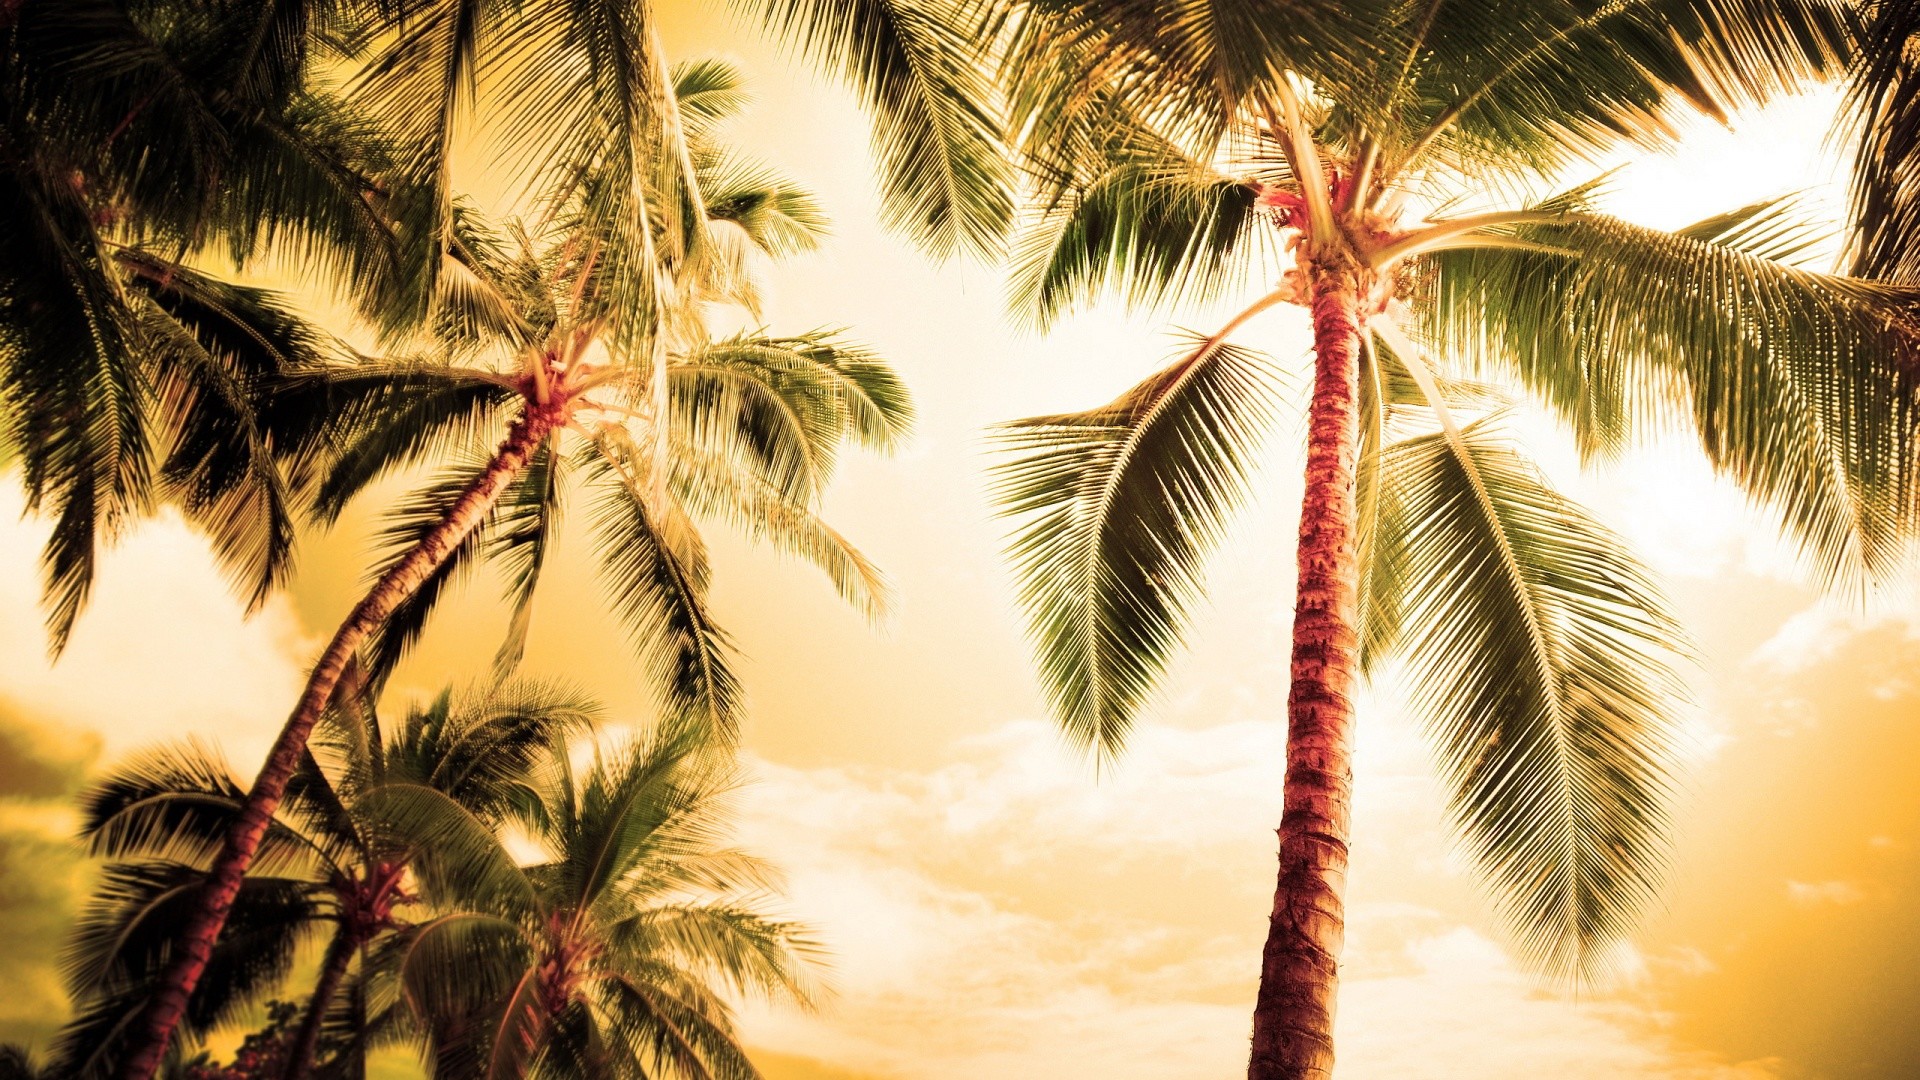 1920x1080 Palm Tree Wallpapers